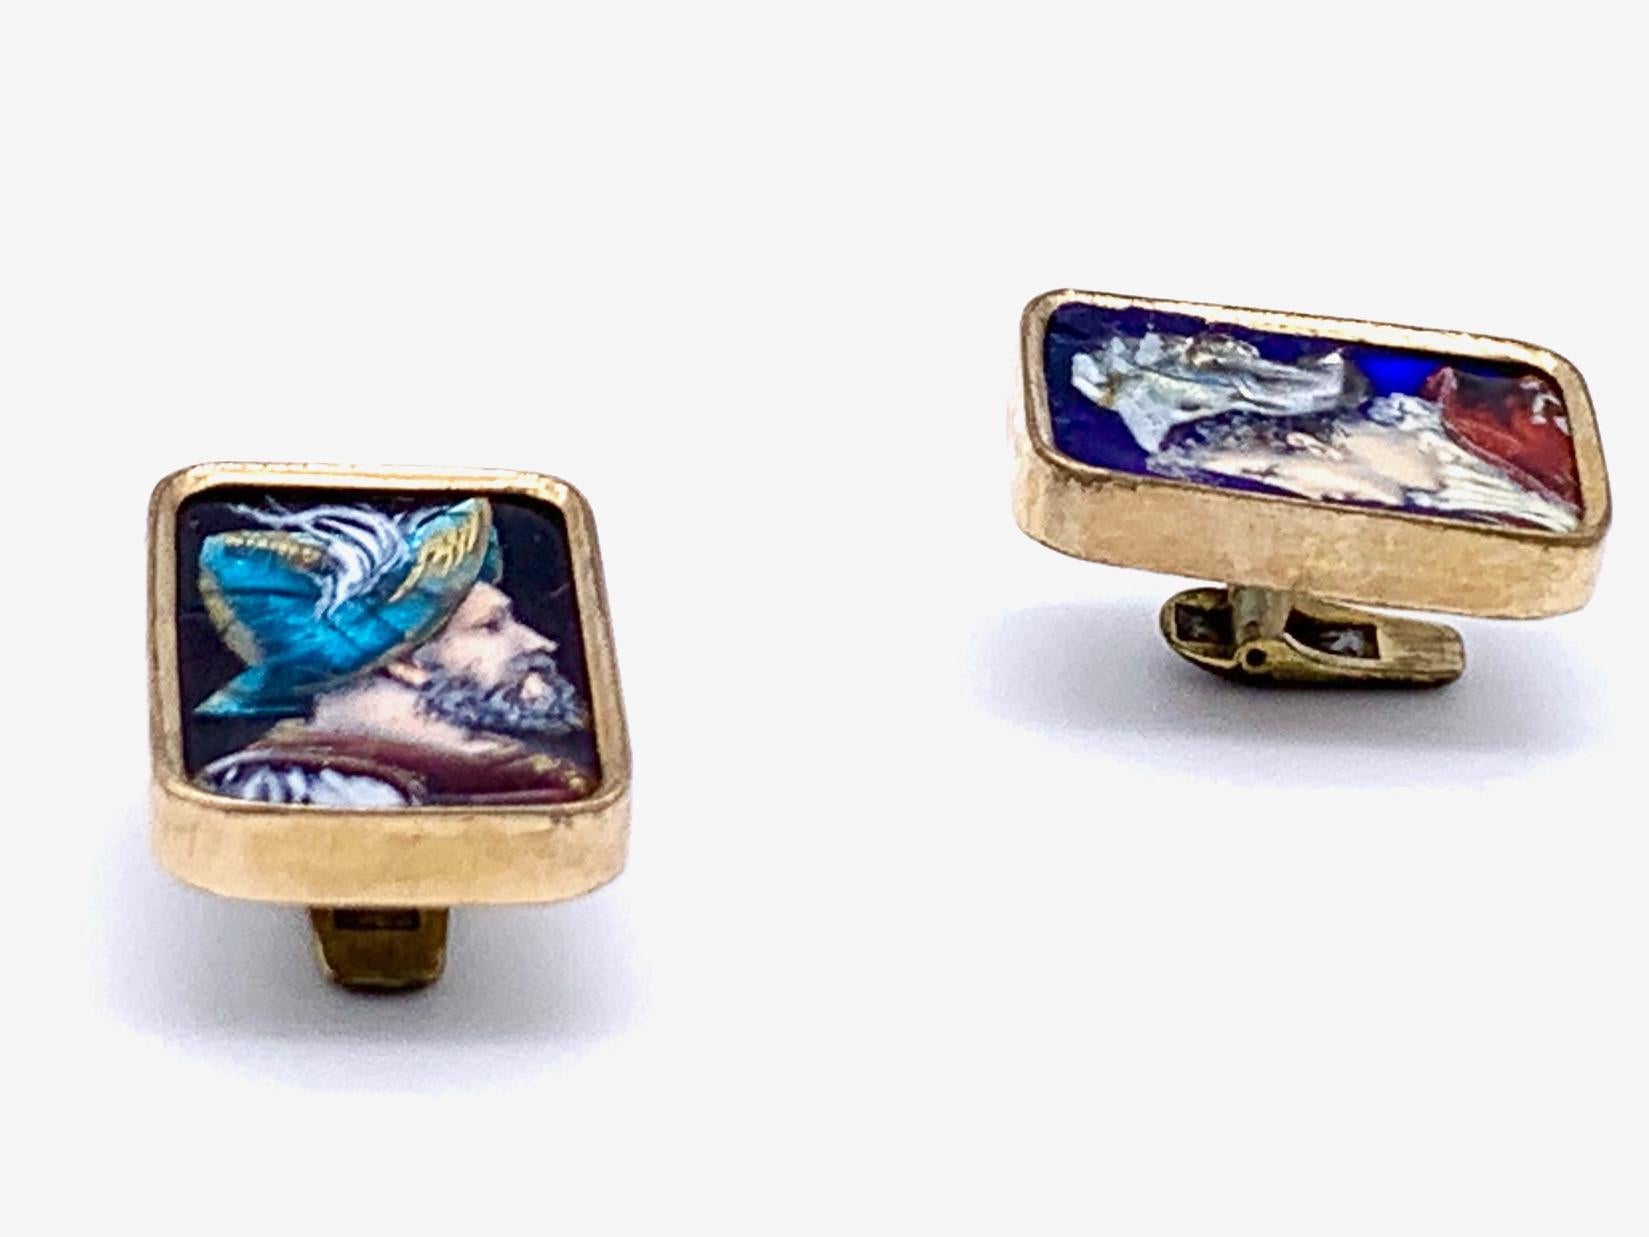 Rare pair of beautifully enamelled buttons - cufflinks with portaits of a couple dressed sumptuously in elegant Renaissance dress.